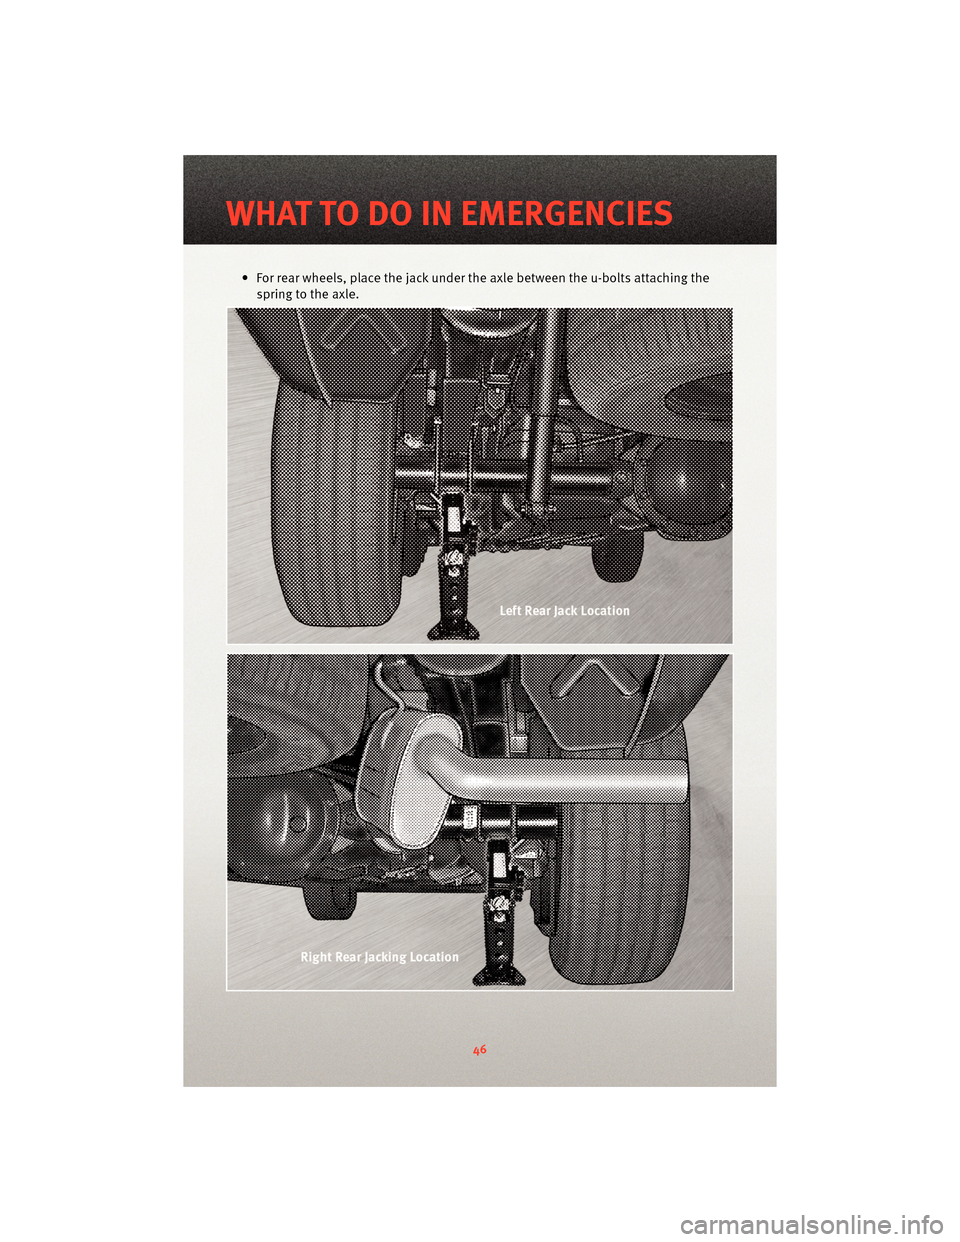 DODGE DAKOTA 2010 3.G Service Manual • For rear wheels, place the jack under the axle between the u-bolts attaching thespring to the axle.
WHAT TO DO IN EMERGENCIES
46 